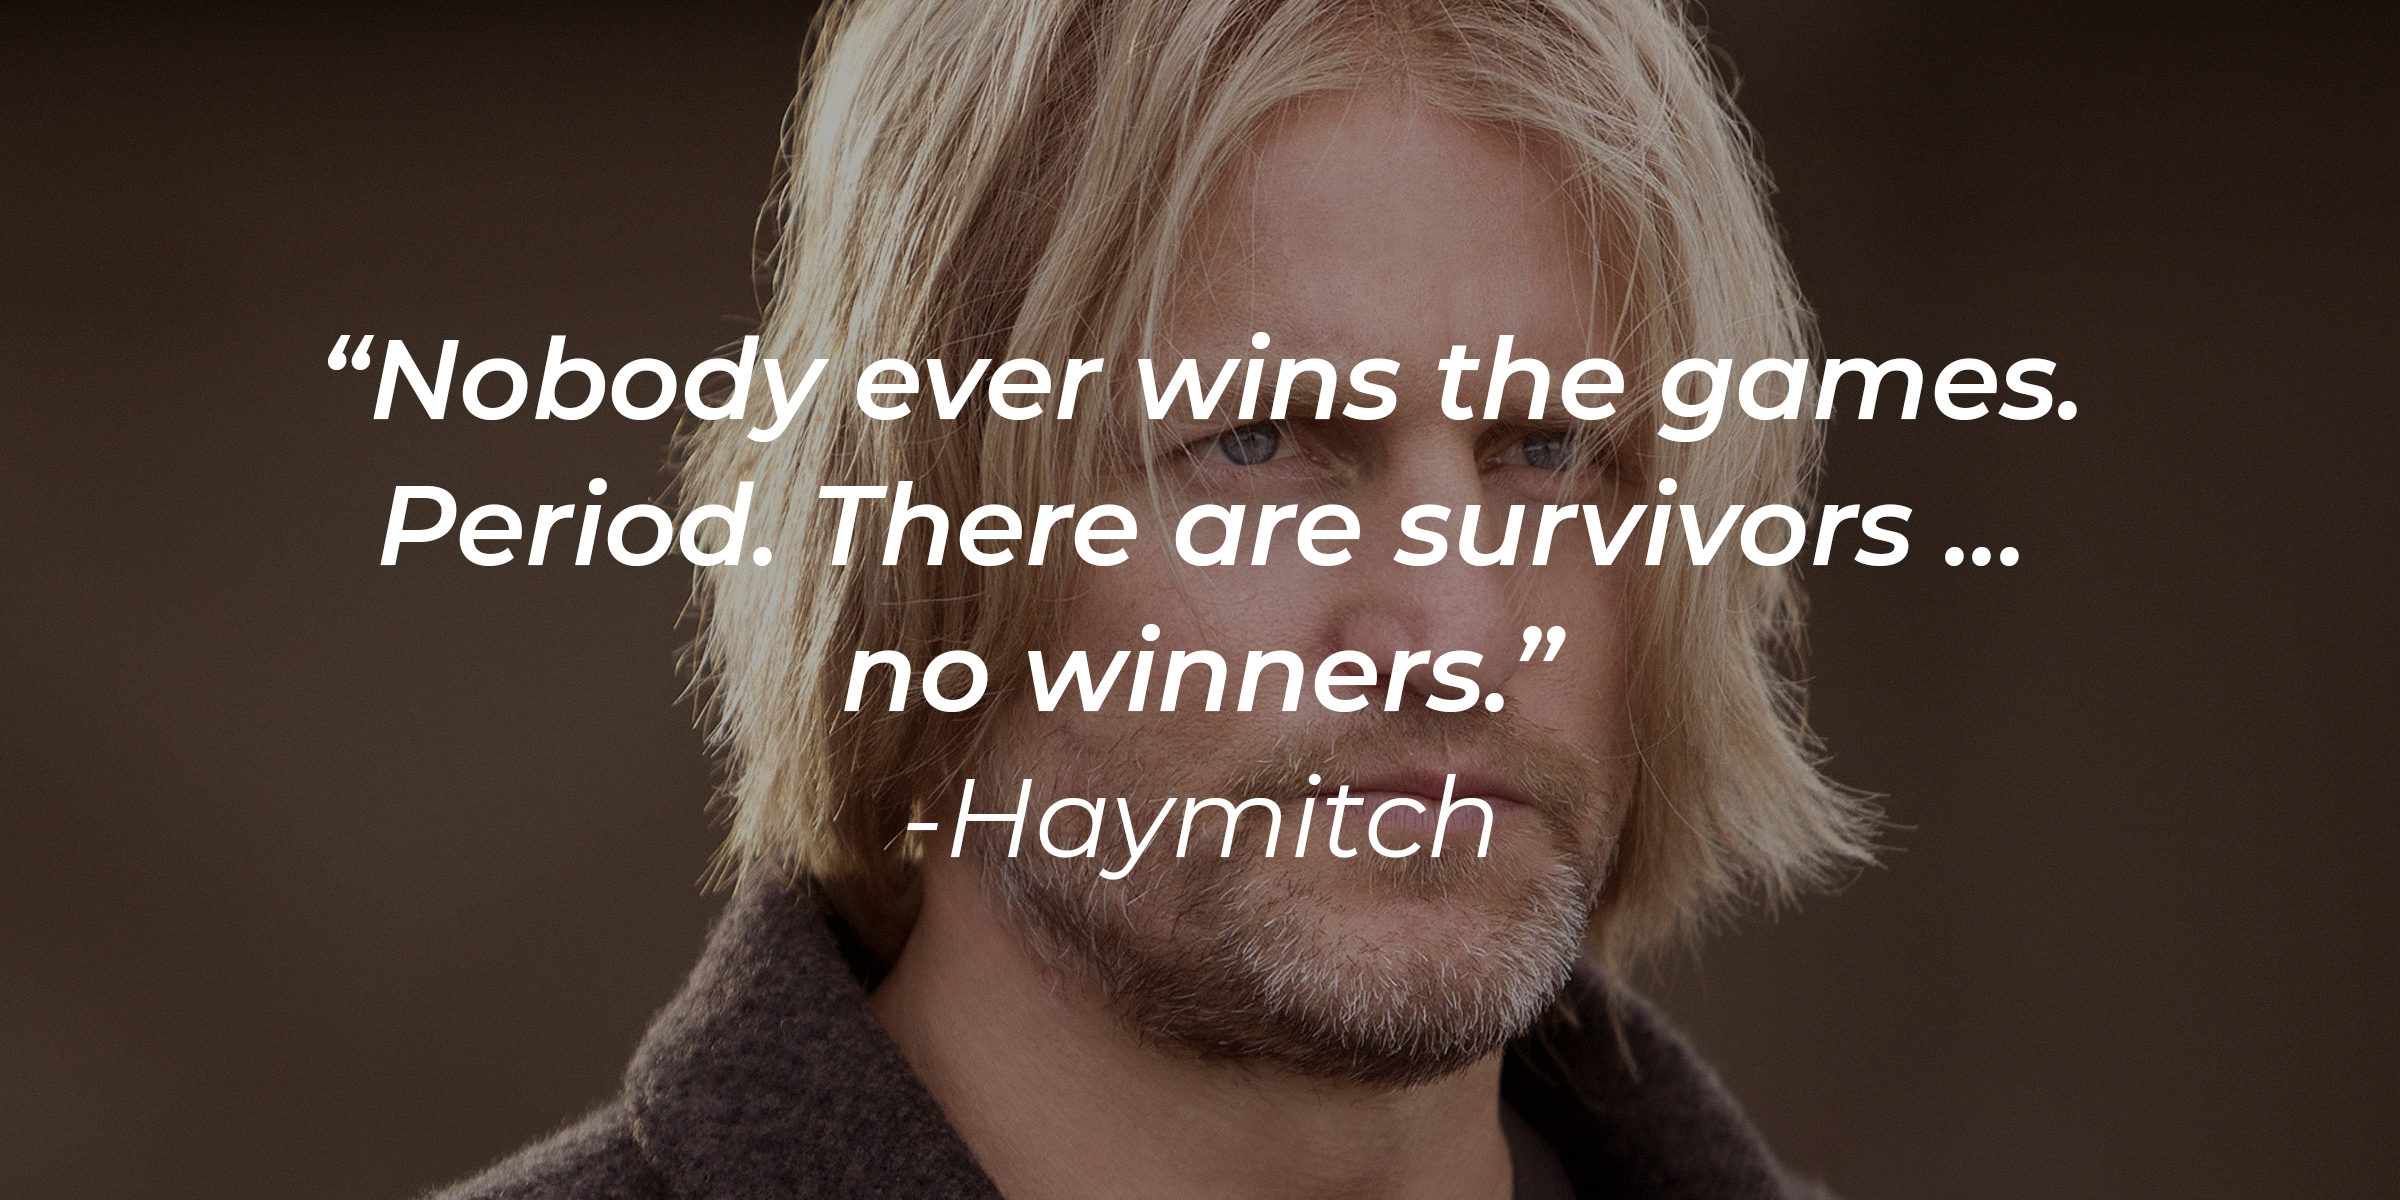 A photo of Haymitch with Haymitch's quote: "Nobody ever wins the games. Period. There are survivors .. no winners." | Source: facebook.com/TheHungerGamesMovie